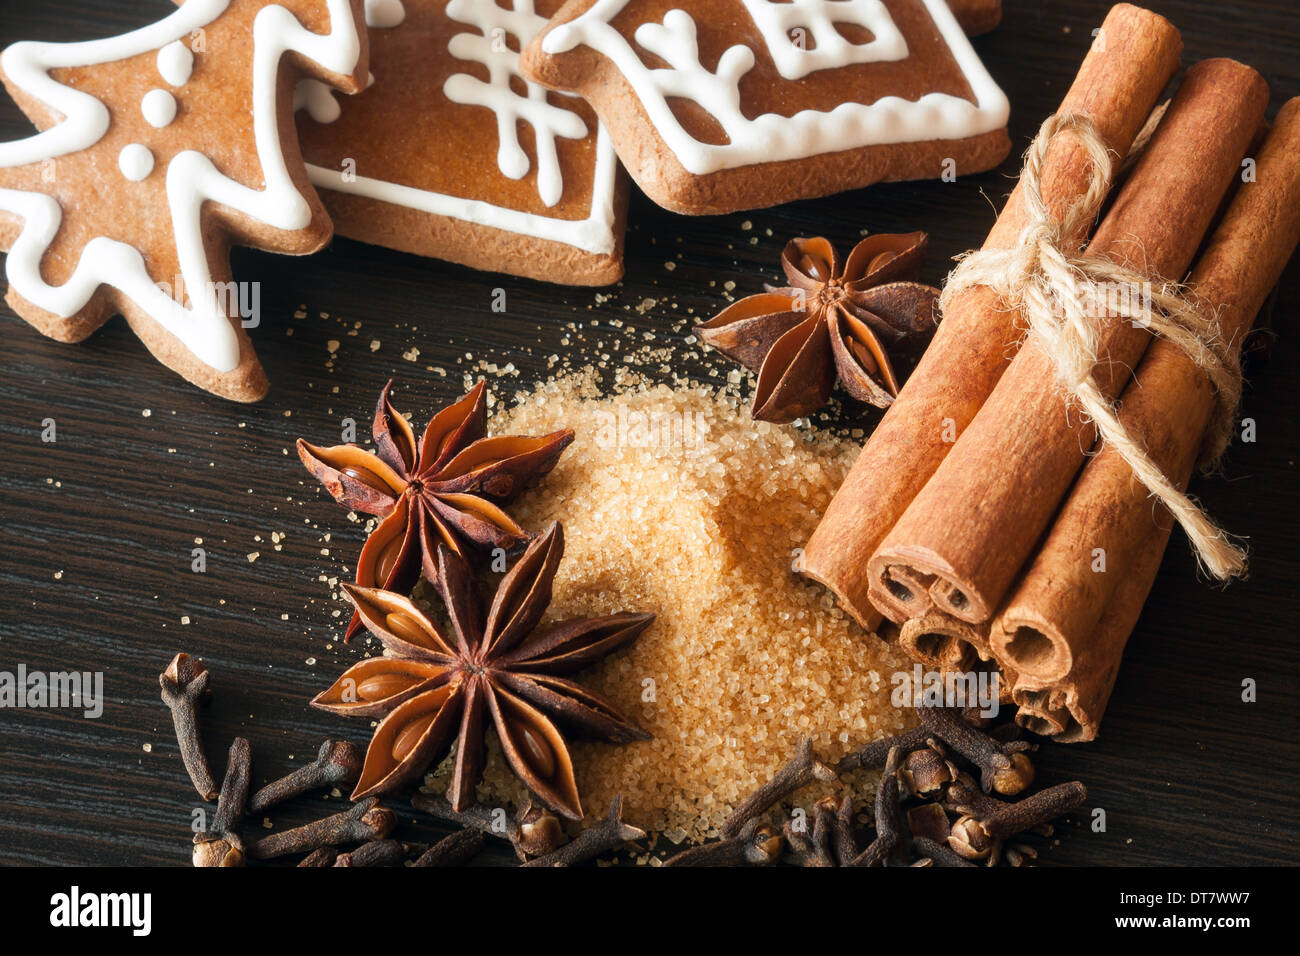 Cookies and various spices - anise, cinnamon, clove and cane sugar Stock Photo